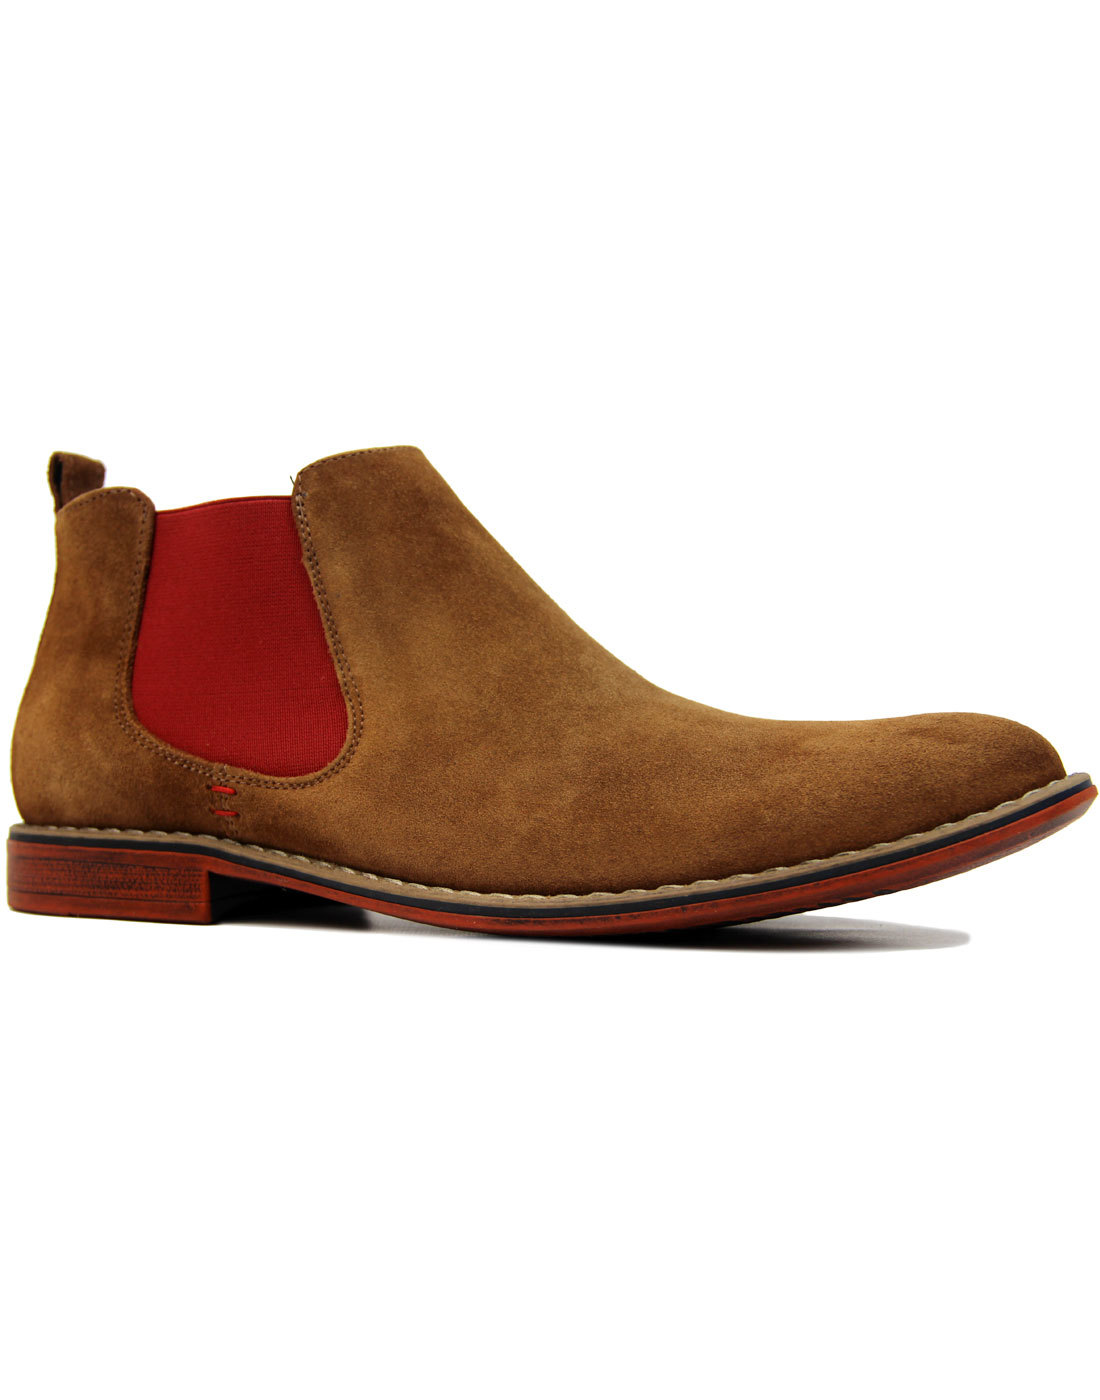 LACUZZO Mod Suede Desert Chelsea Boots TAN/RED